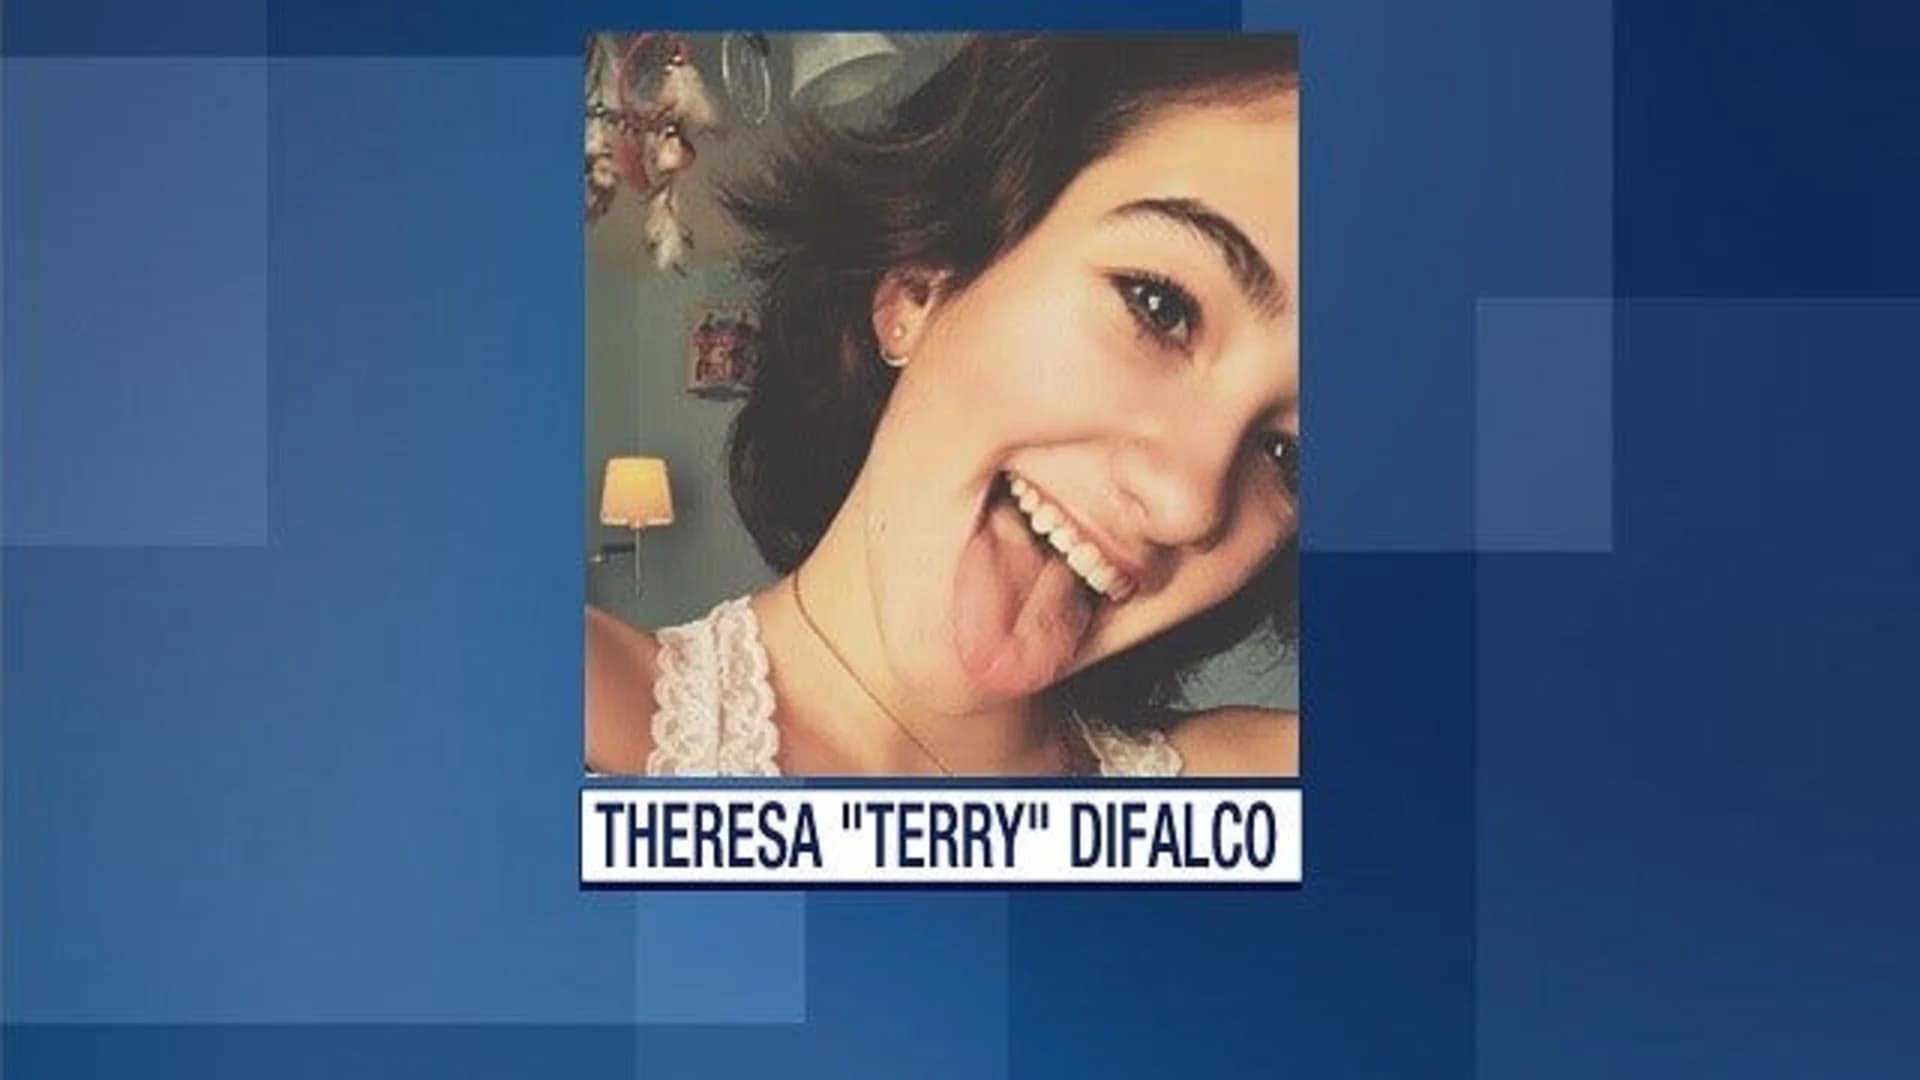 State trooper who struck, killed teen won't face charges